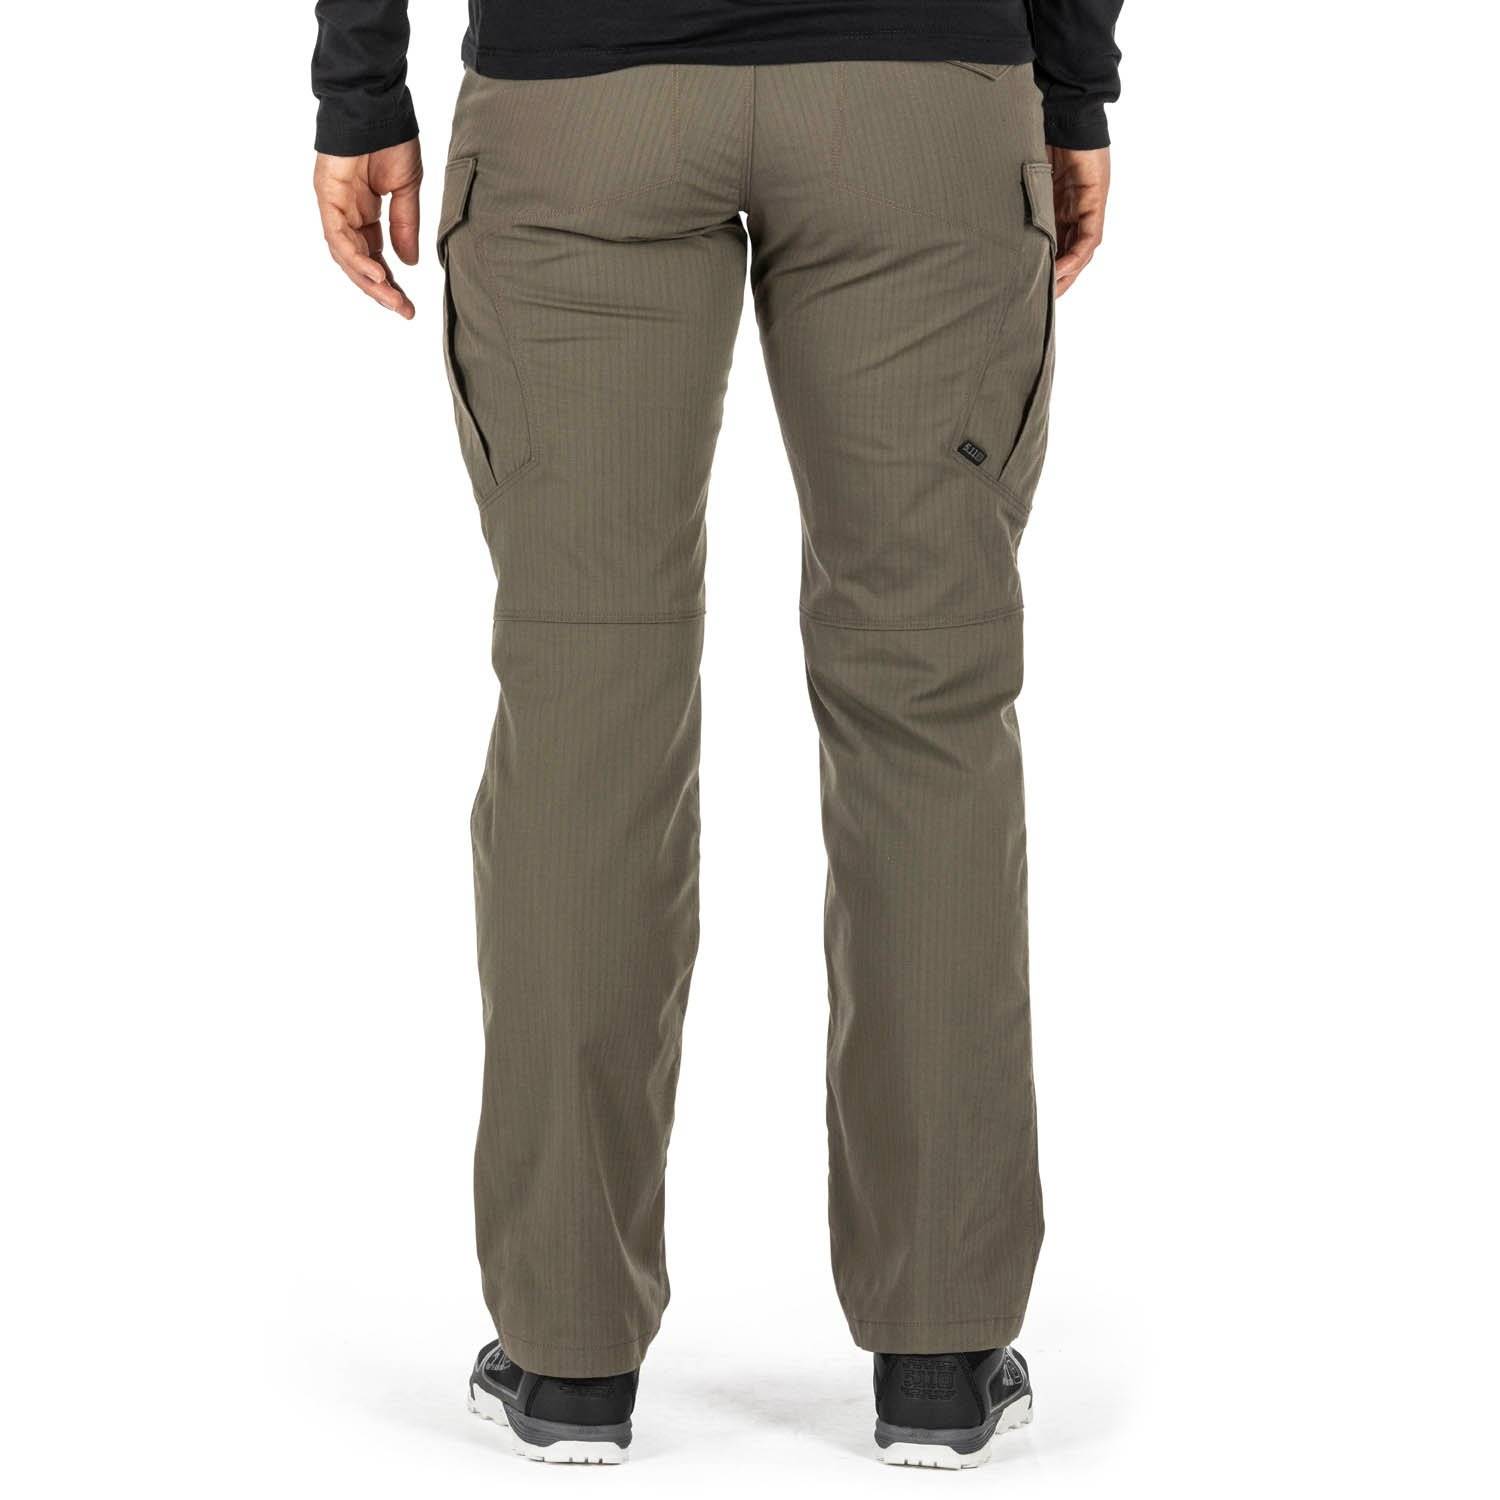 5.11 Tactical Women's Icon Tactical Pant